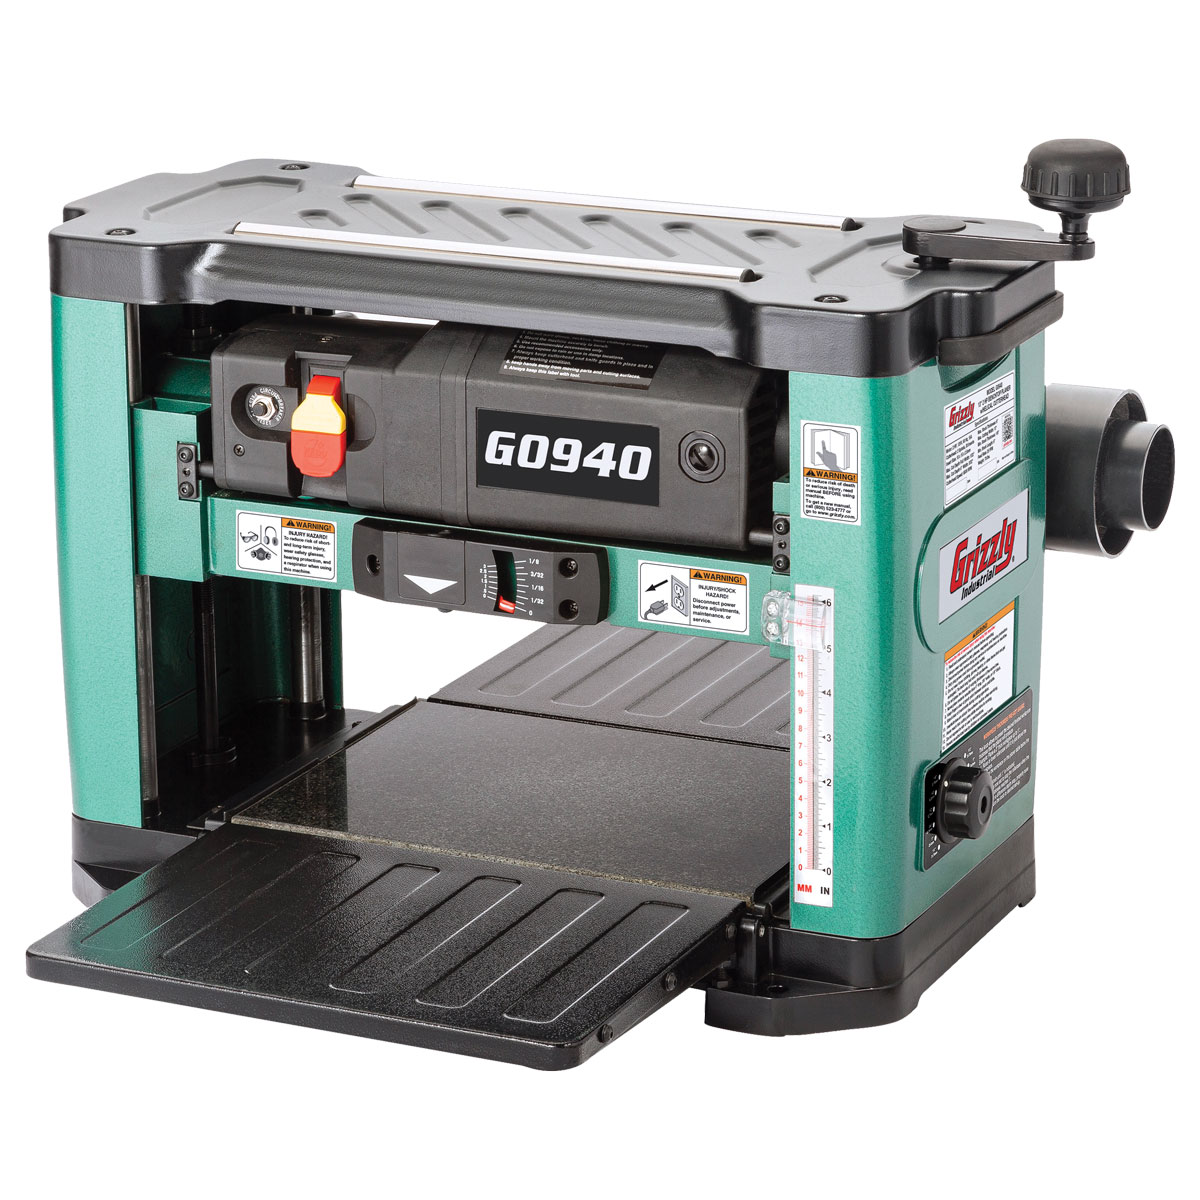 the G09340, has a helical head, a granite table, and a depth stop